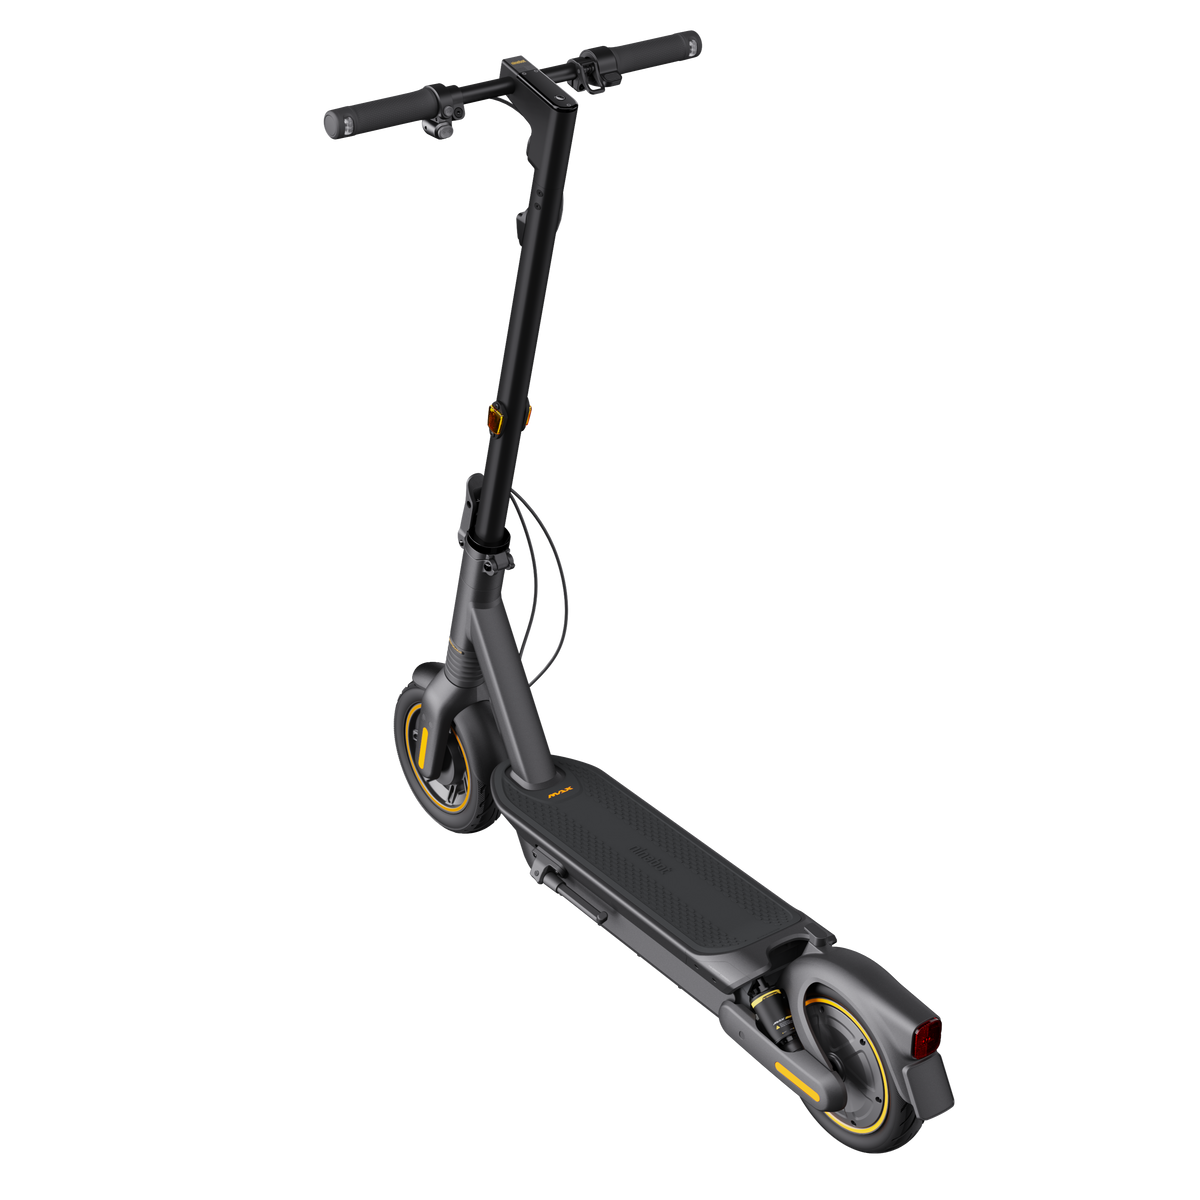 SEGWAY NINEBOT MAX G2 (New 2023 Edition) Top speed 25-32km/hr*